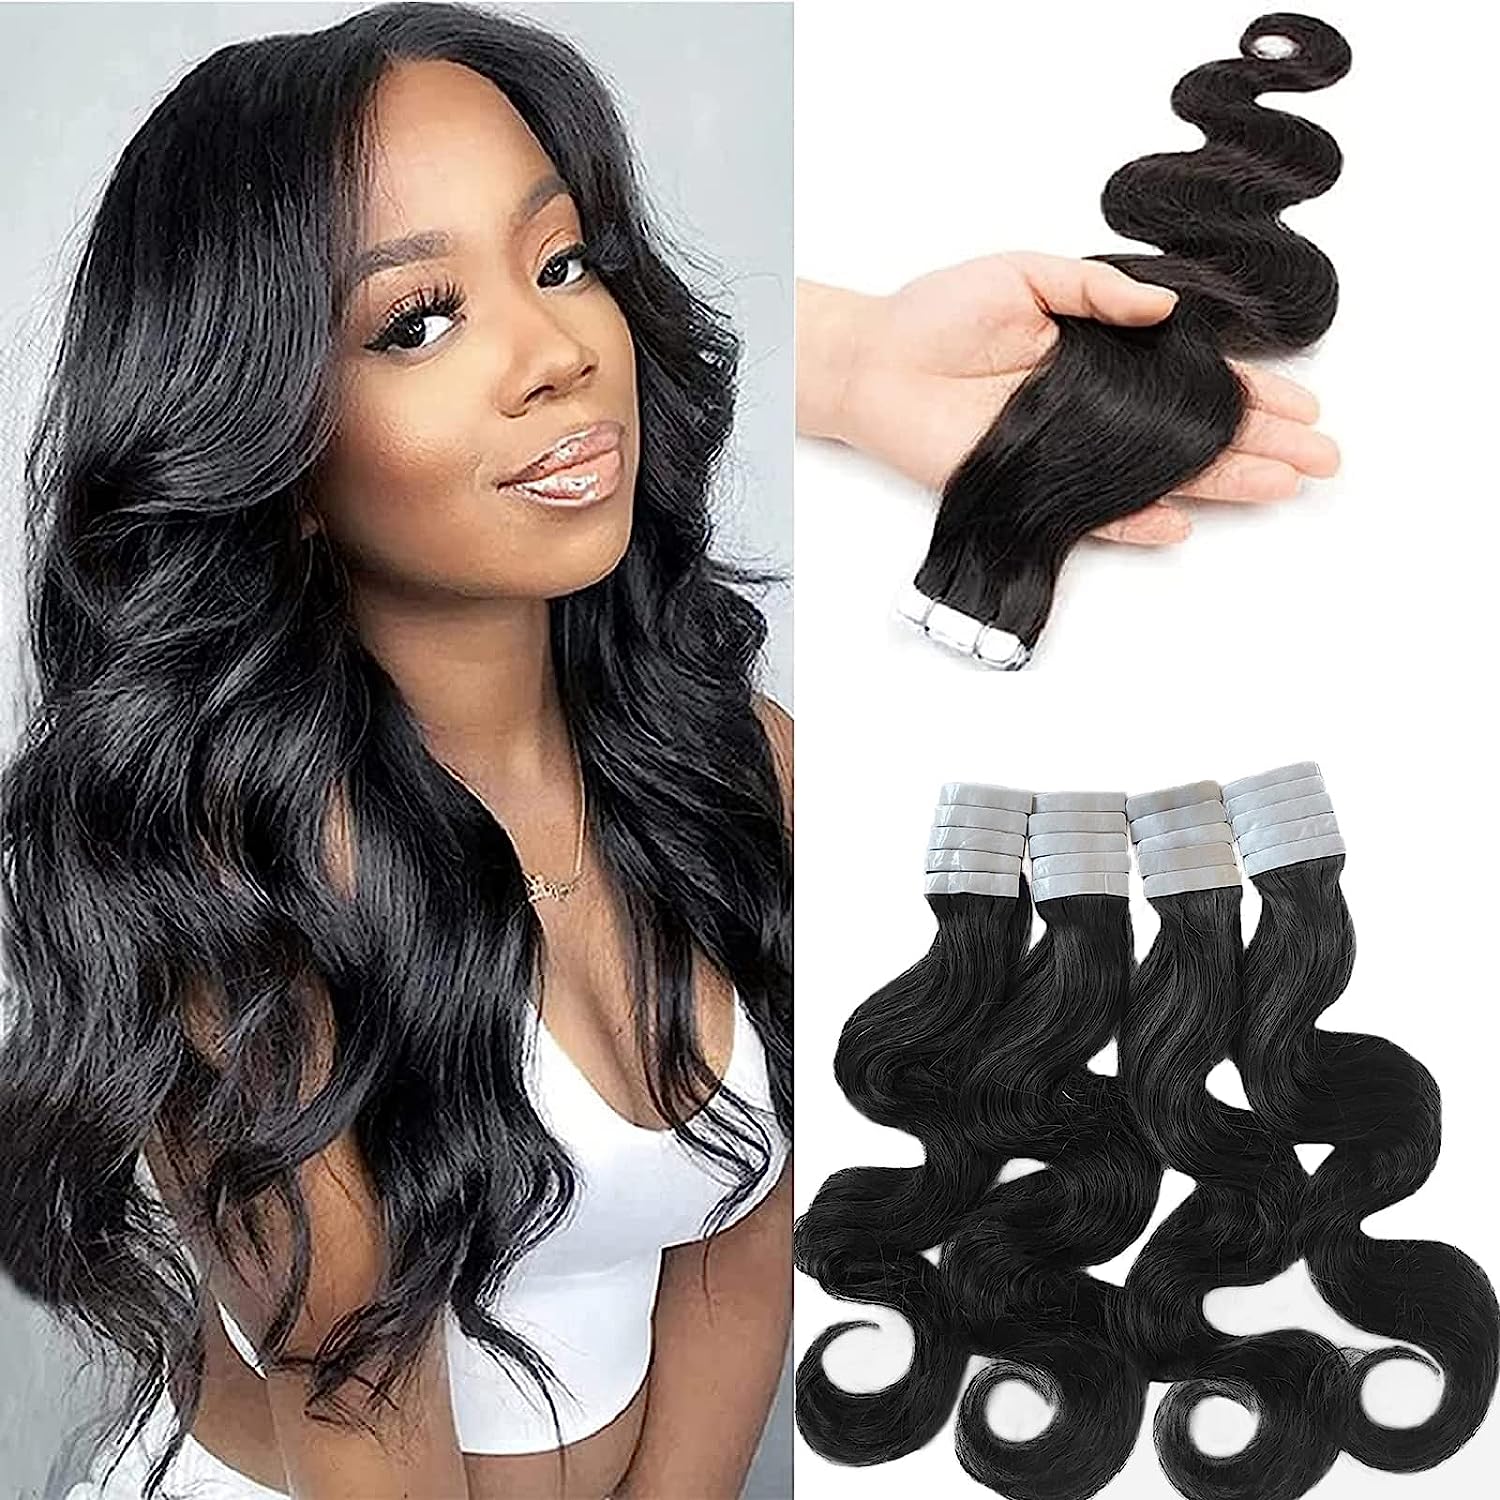 Human Hair Tape in Hair Extensions 20 Inch for Black [...]